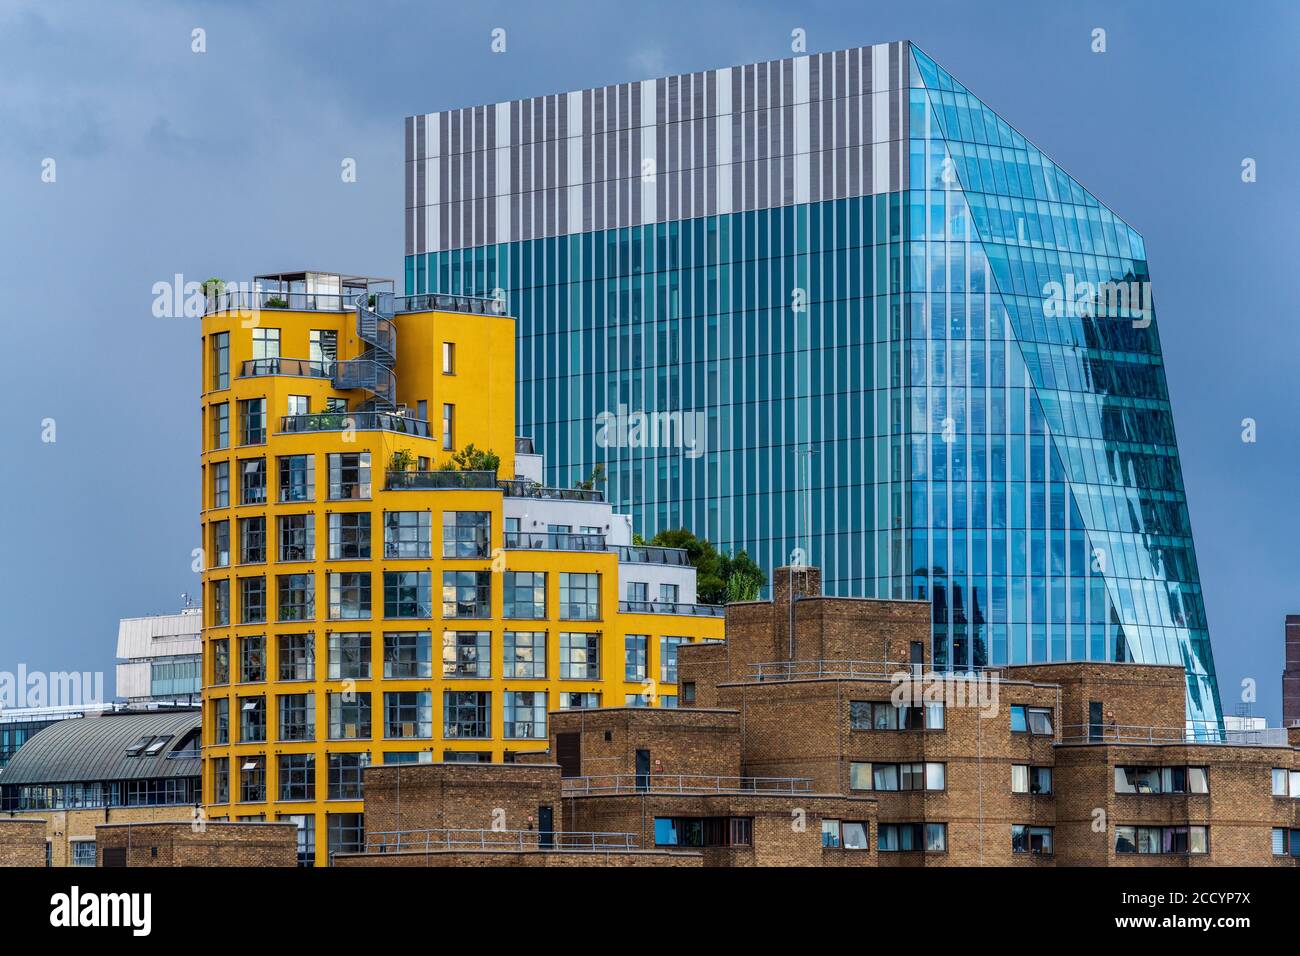 Yellow Bankside Lofts Apartments on London's Southbank (built 1995-98 architect Piers Gough CZWG) & 240 Blackfriars Road Building behind (2014 AHMM) Stock Photo